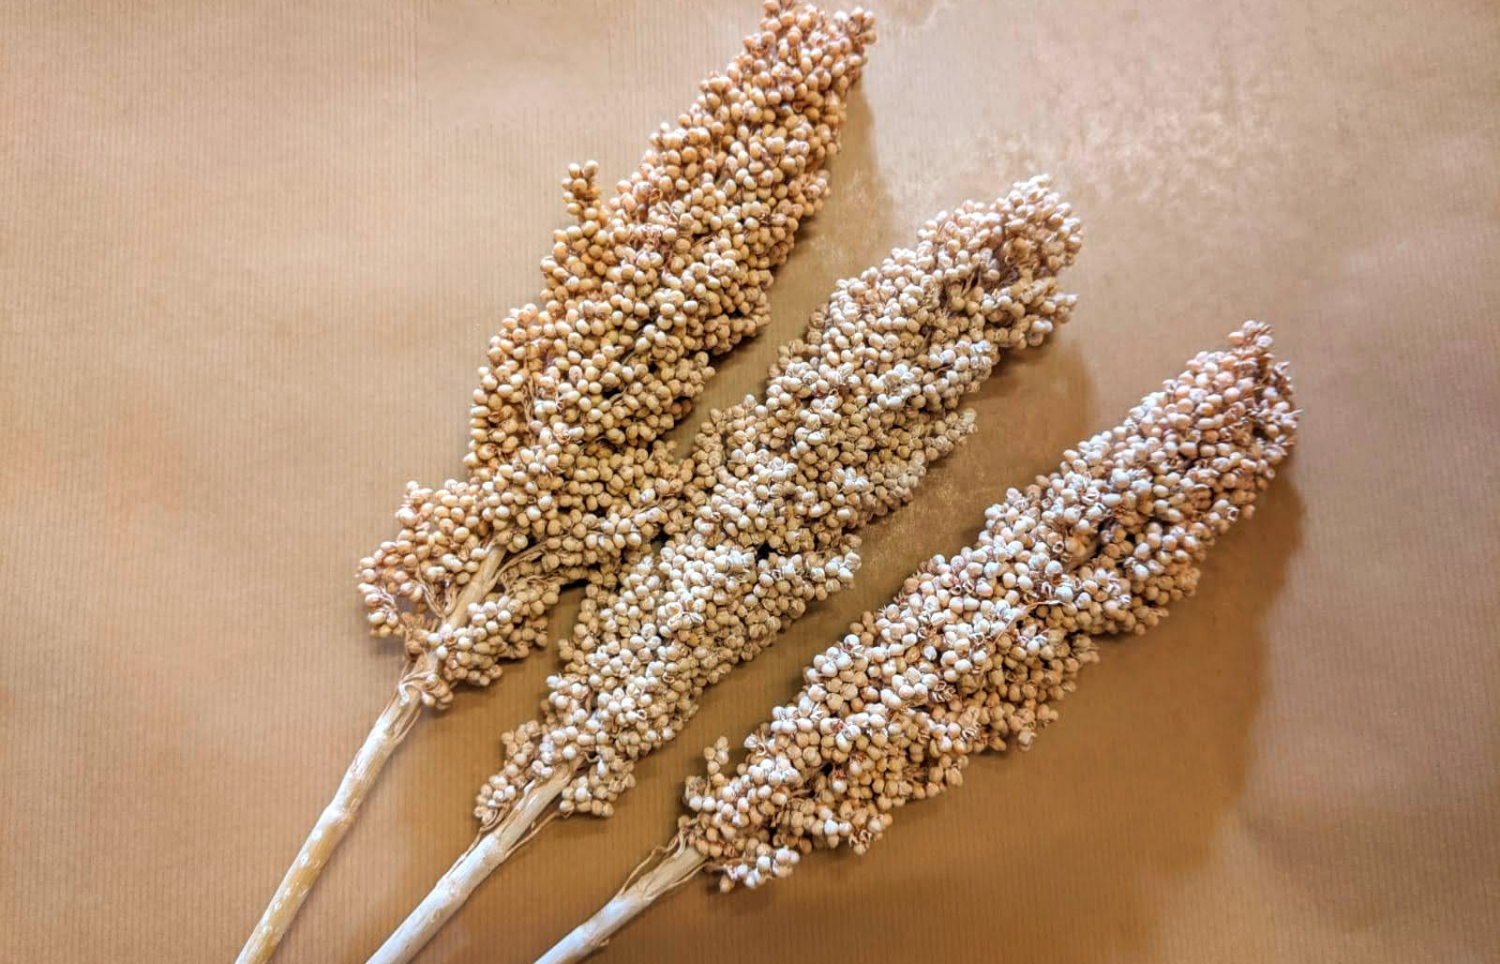 Dried Indian Millet